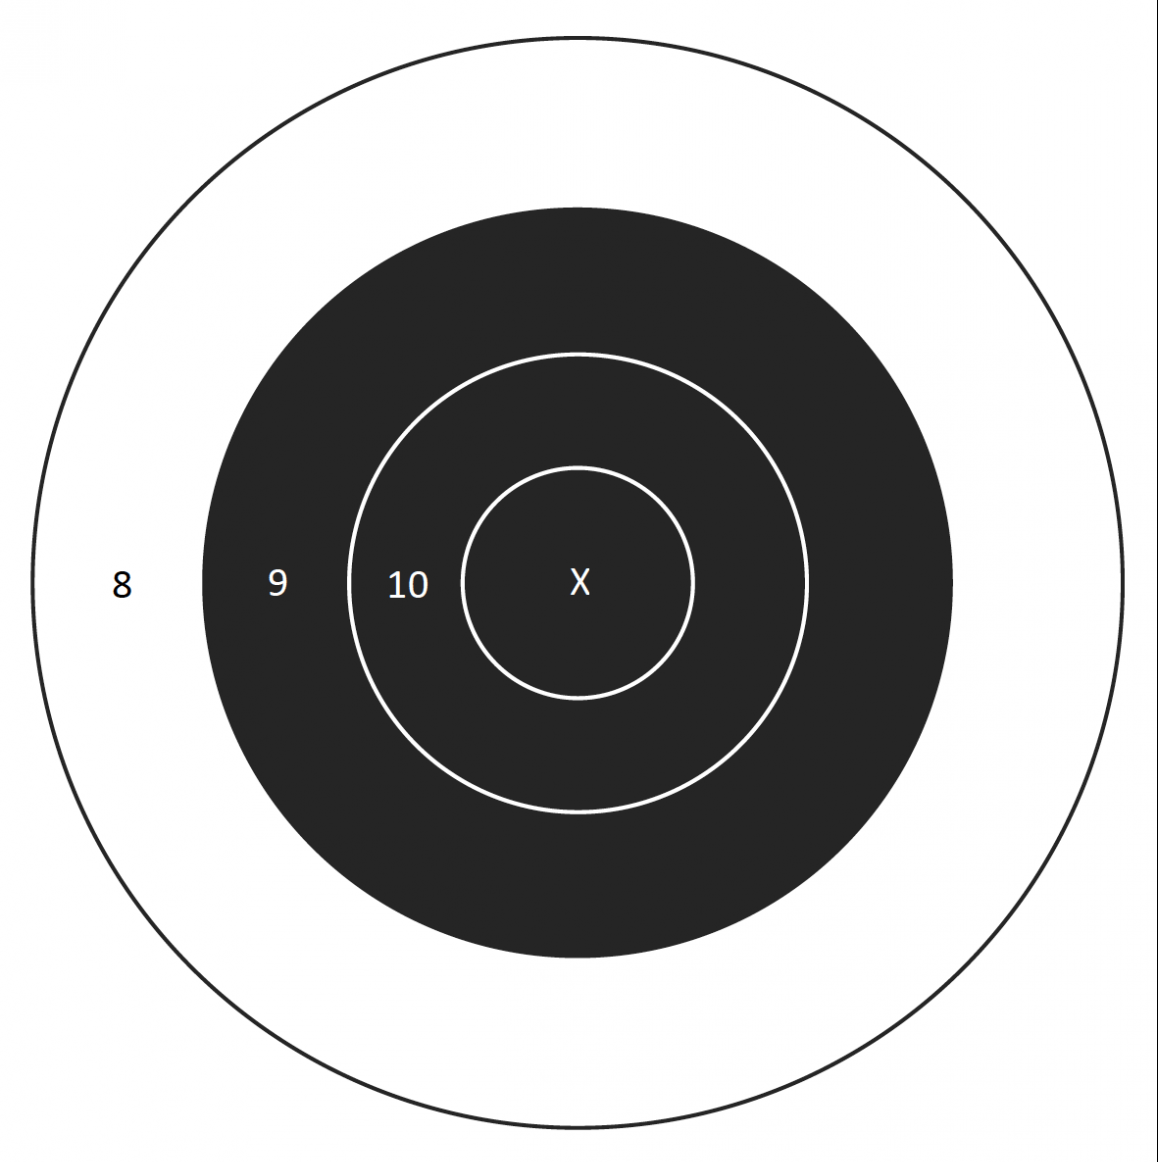 the tactical relevance to b8 targets the firearm blog